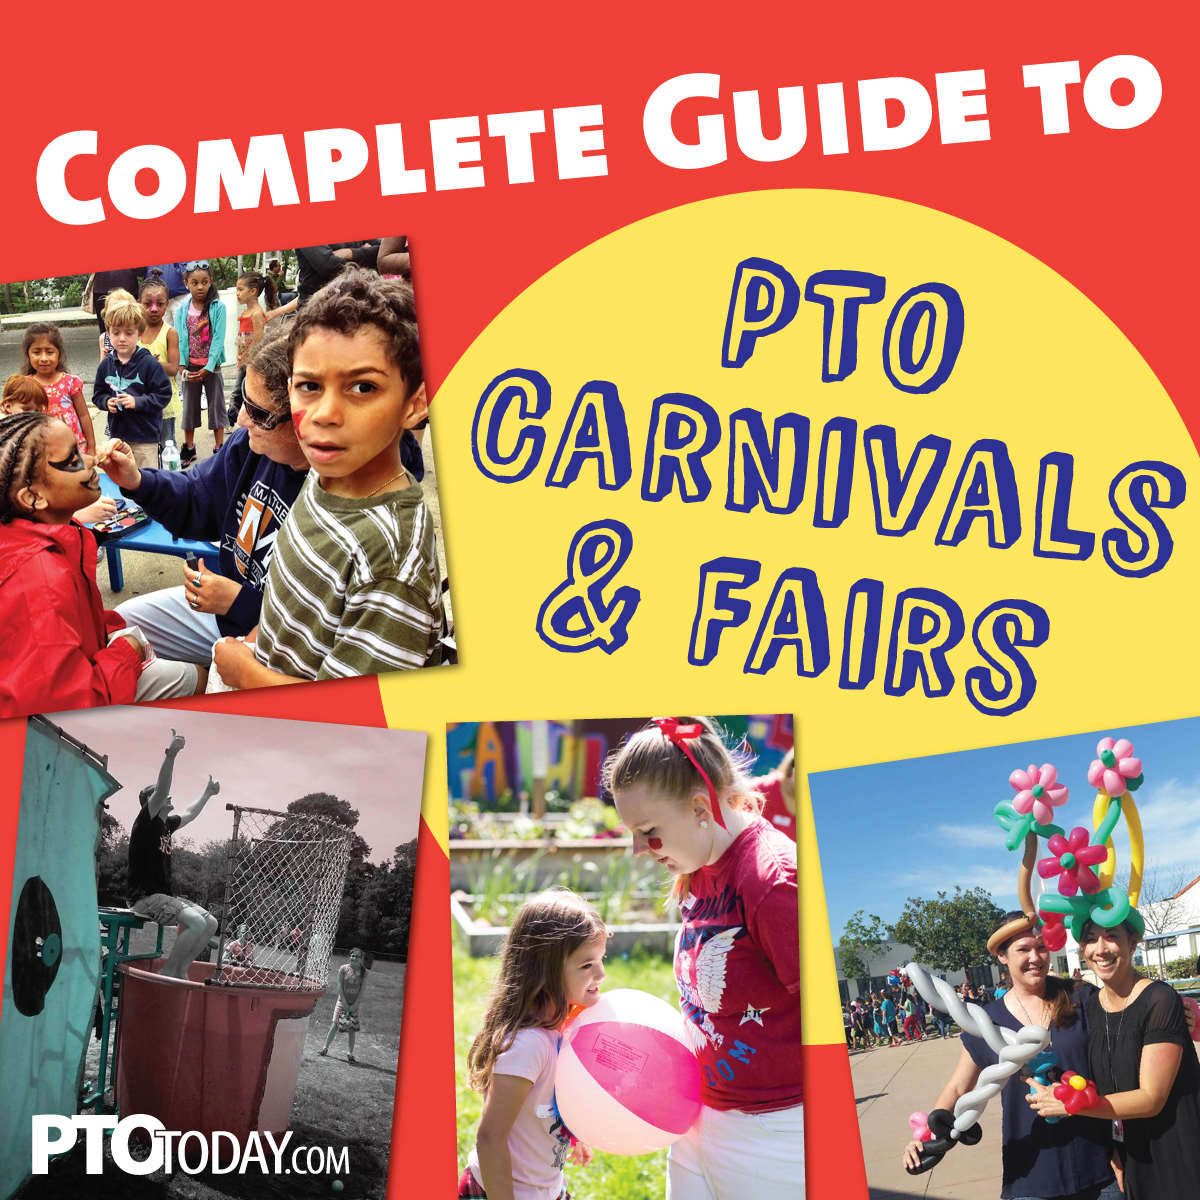 Complete guide to planning school carnivals and fairs